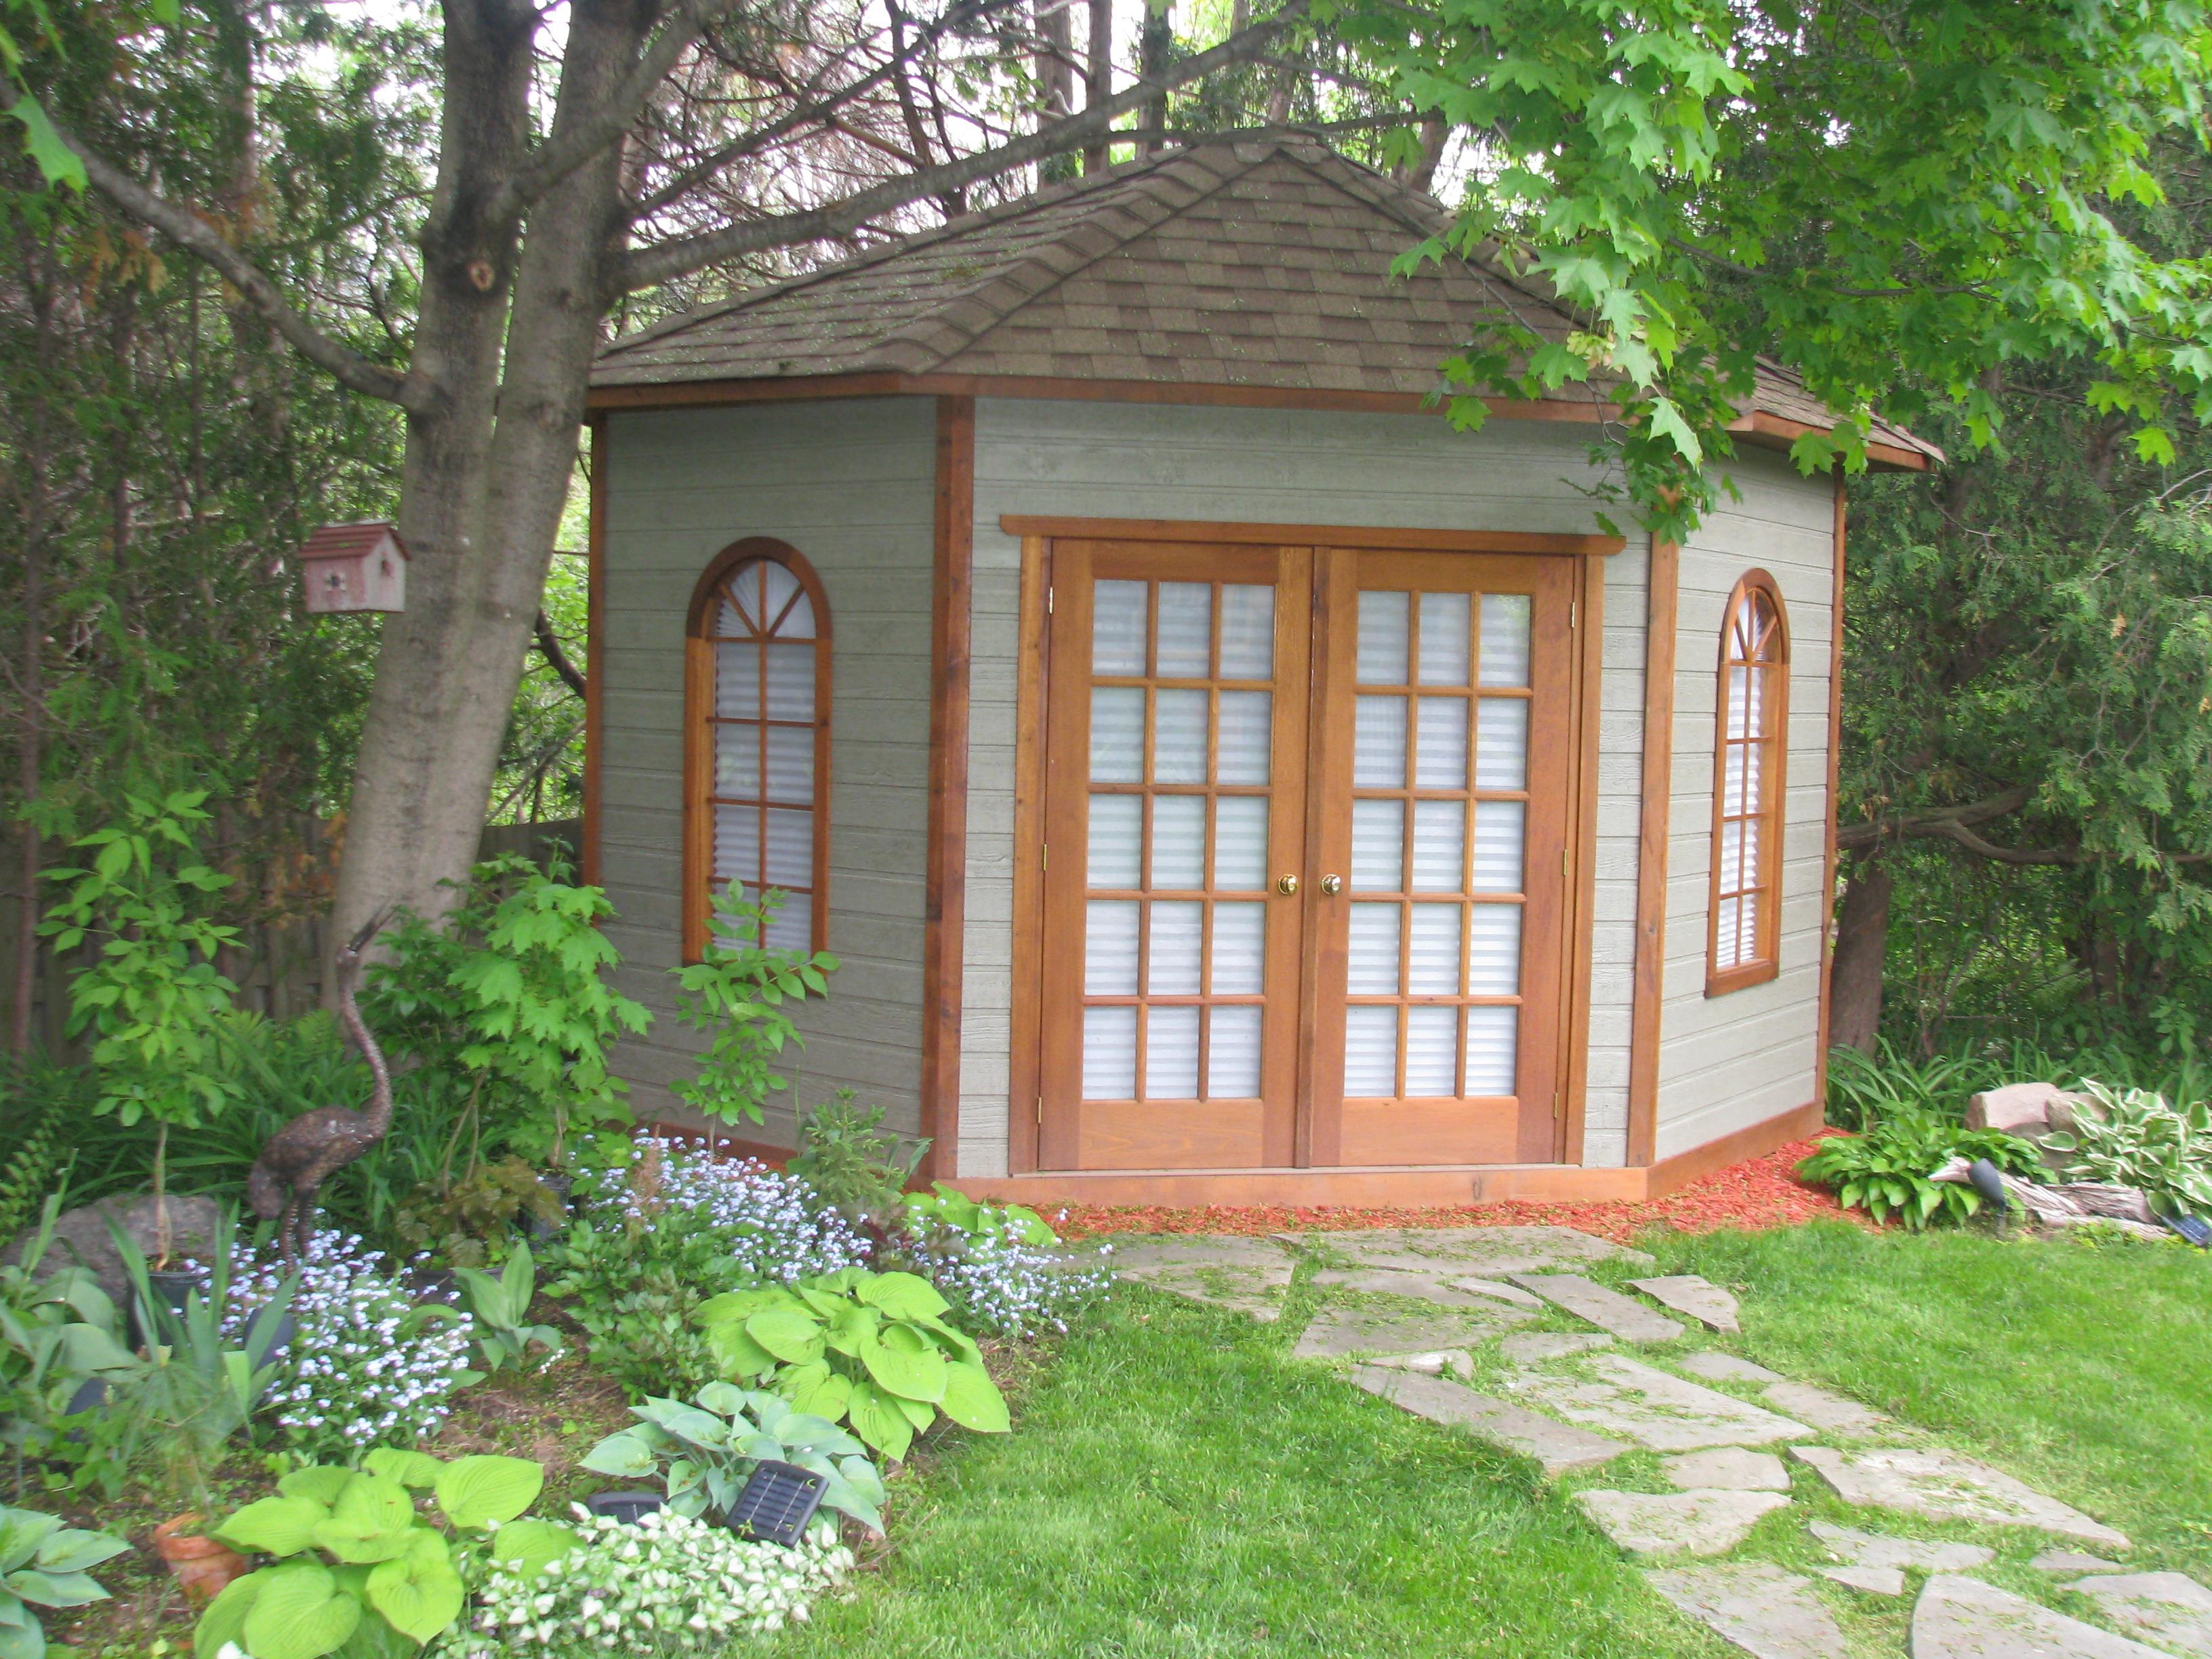 Catalina backyard shed with canexel in Toronto, Ontario. ID number 127941-2